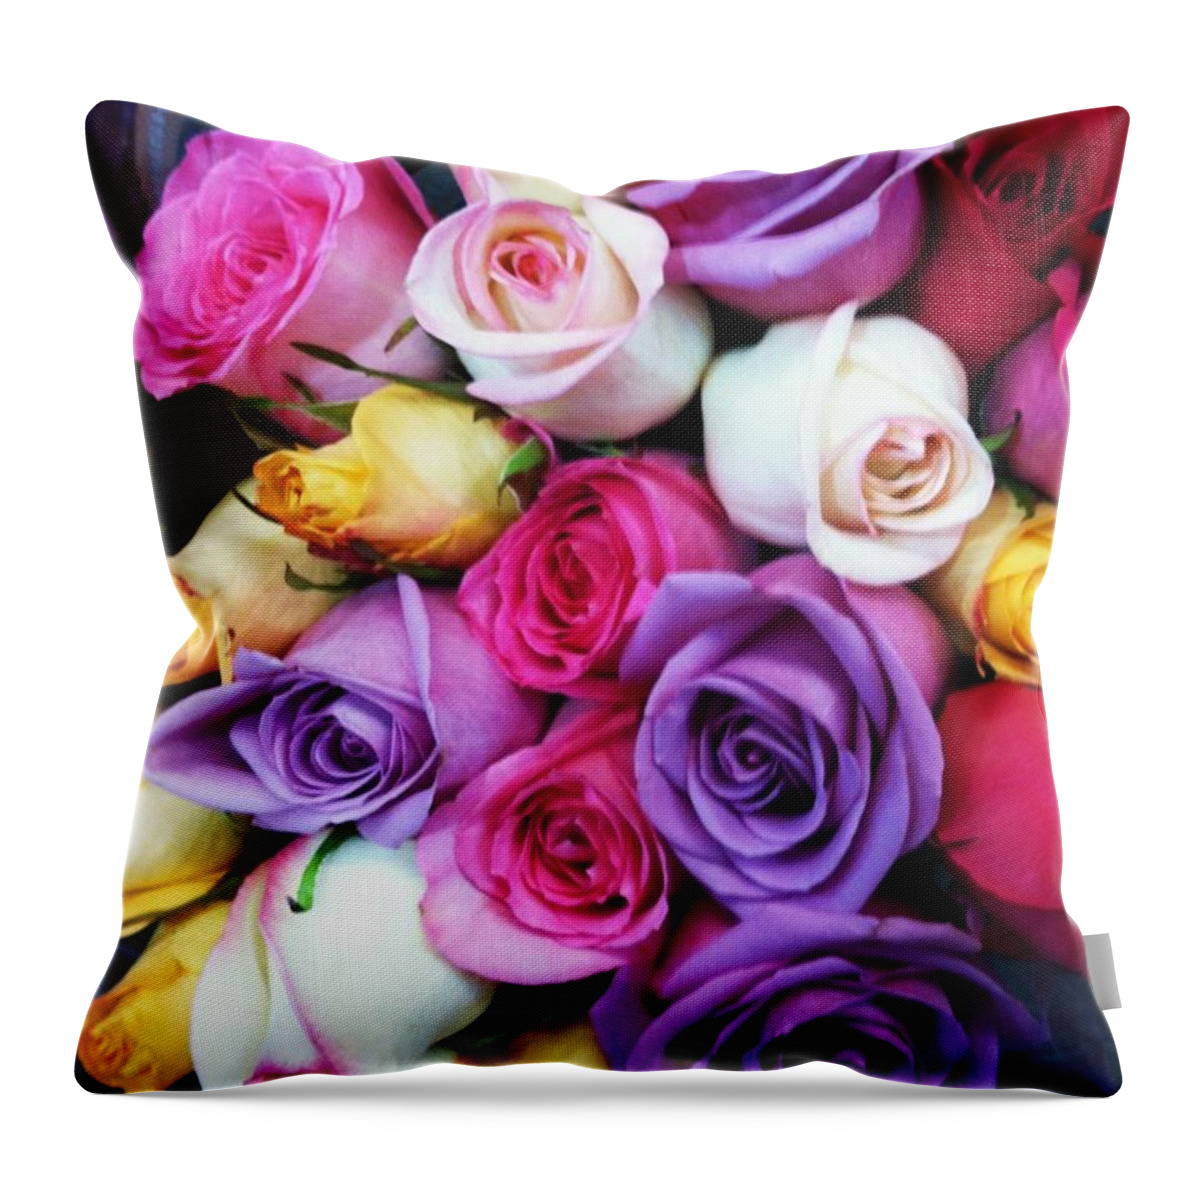 Roses Throw Pillow featuring the photograph Rainbow Rose Bouquet by Anna Villarreal Garbis